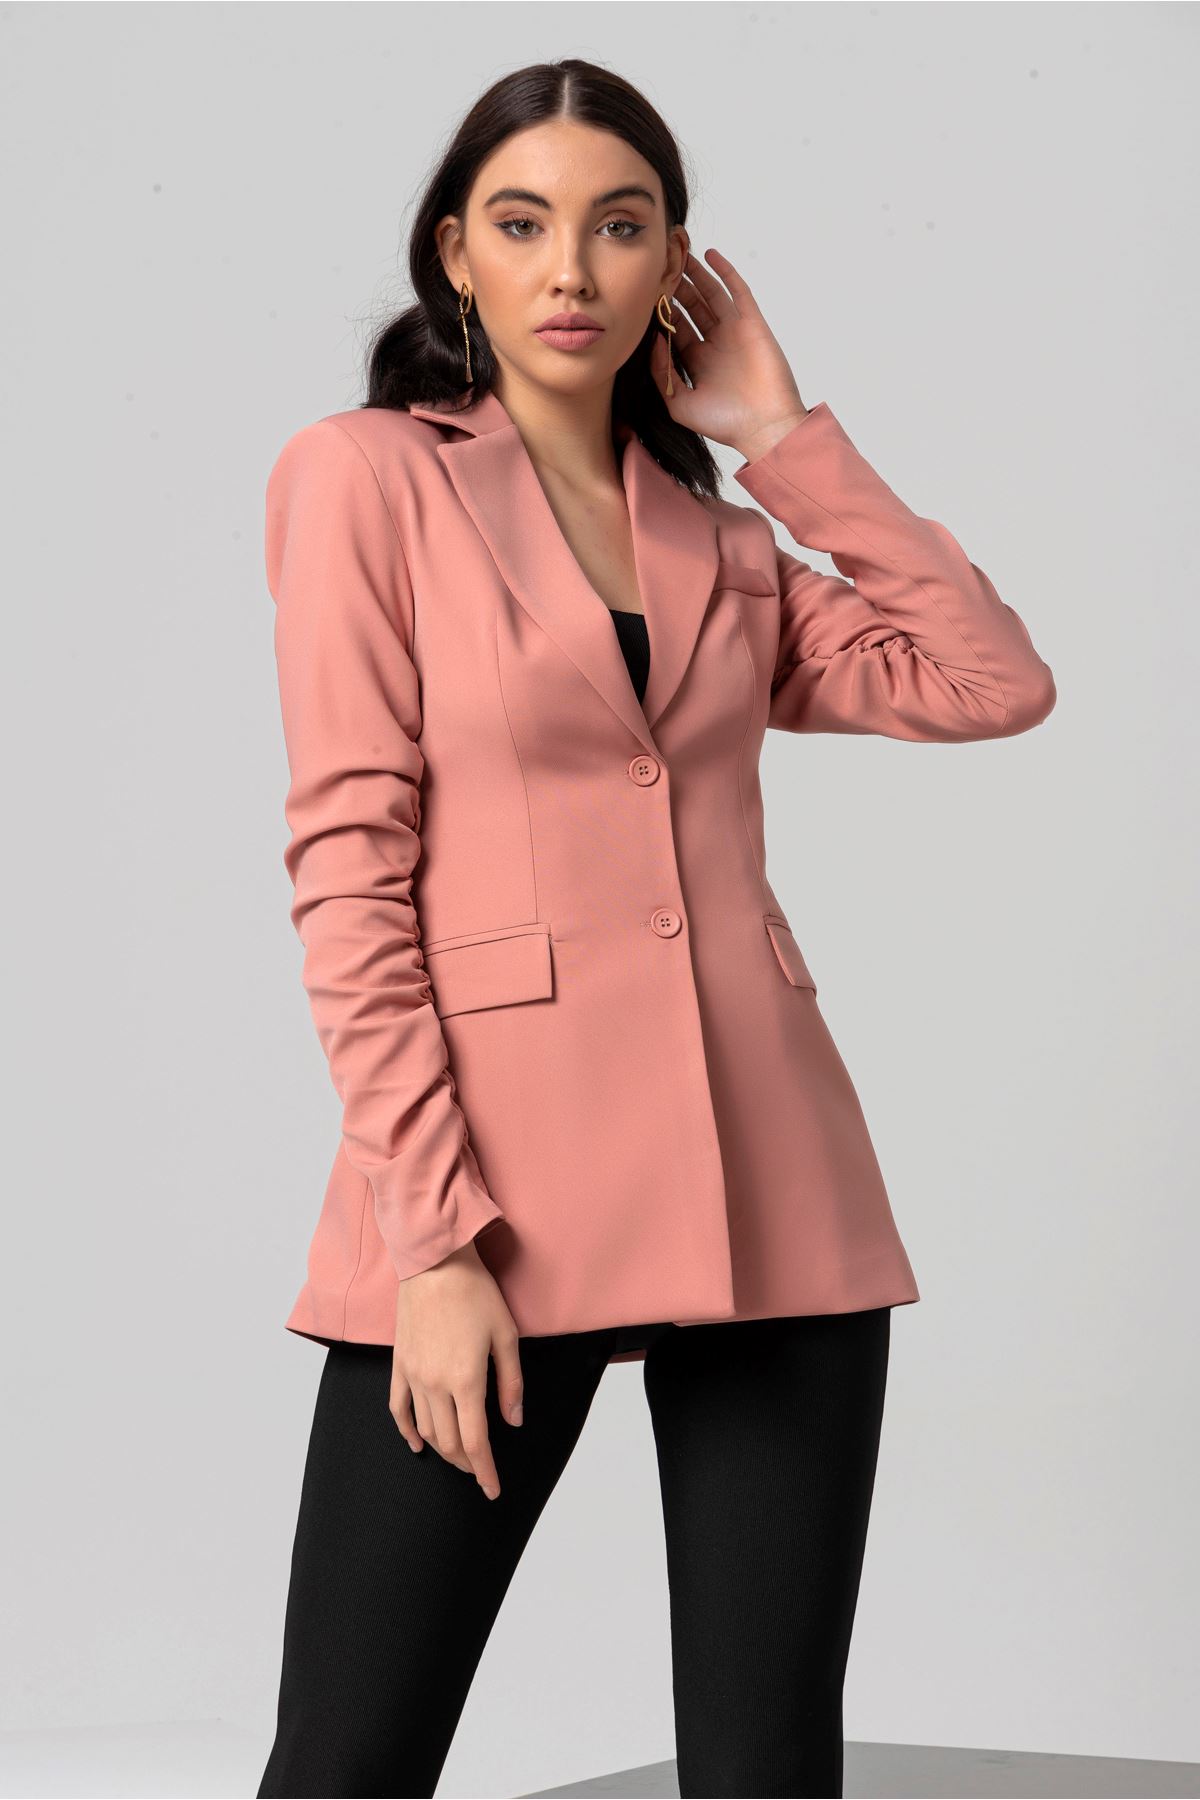 Polyester Fabric Hip Height Classical Shirred Sleeve Women Jacket - Light Pink